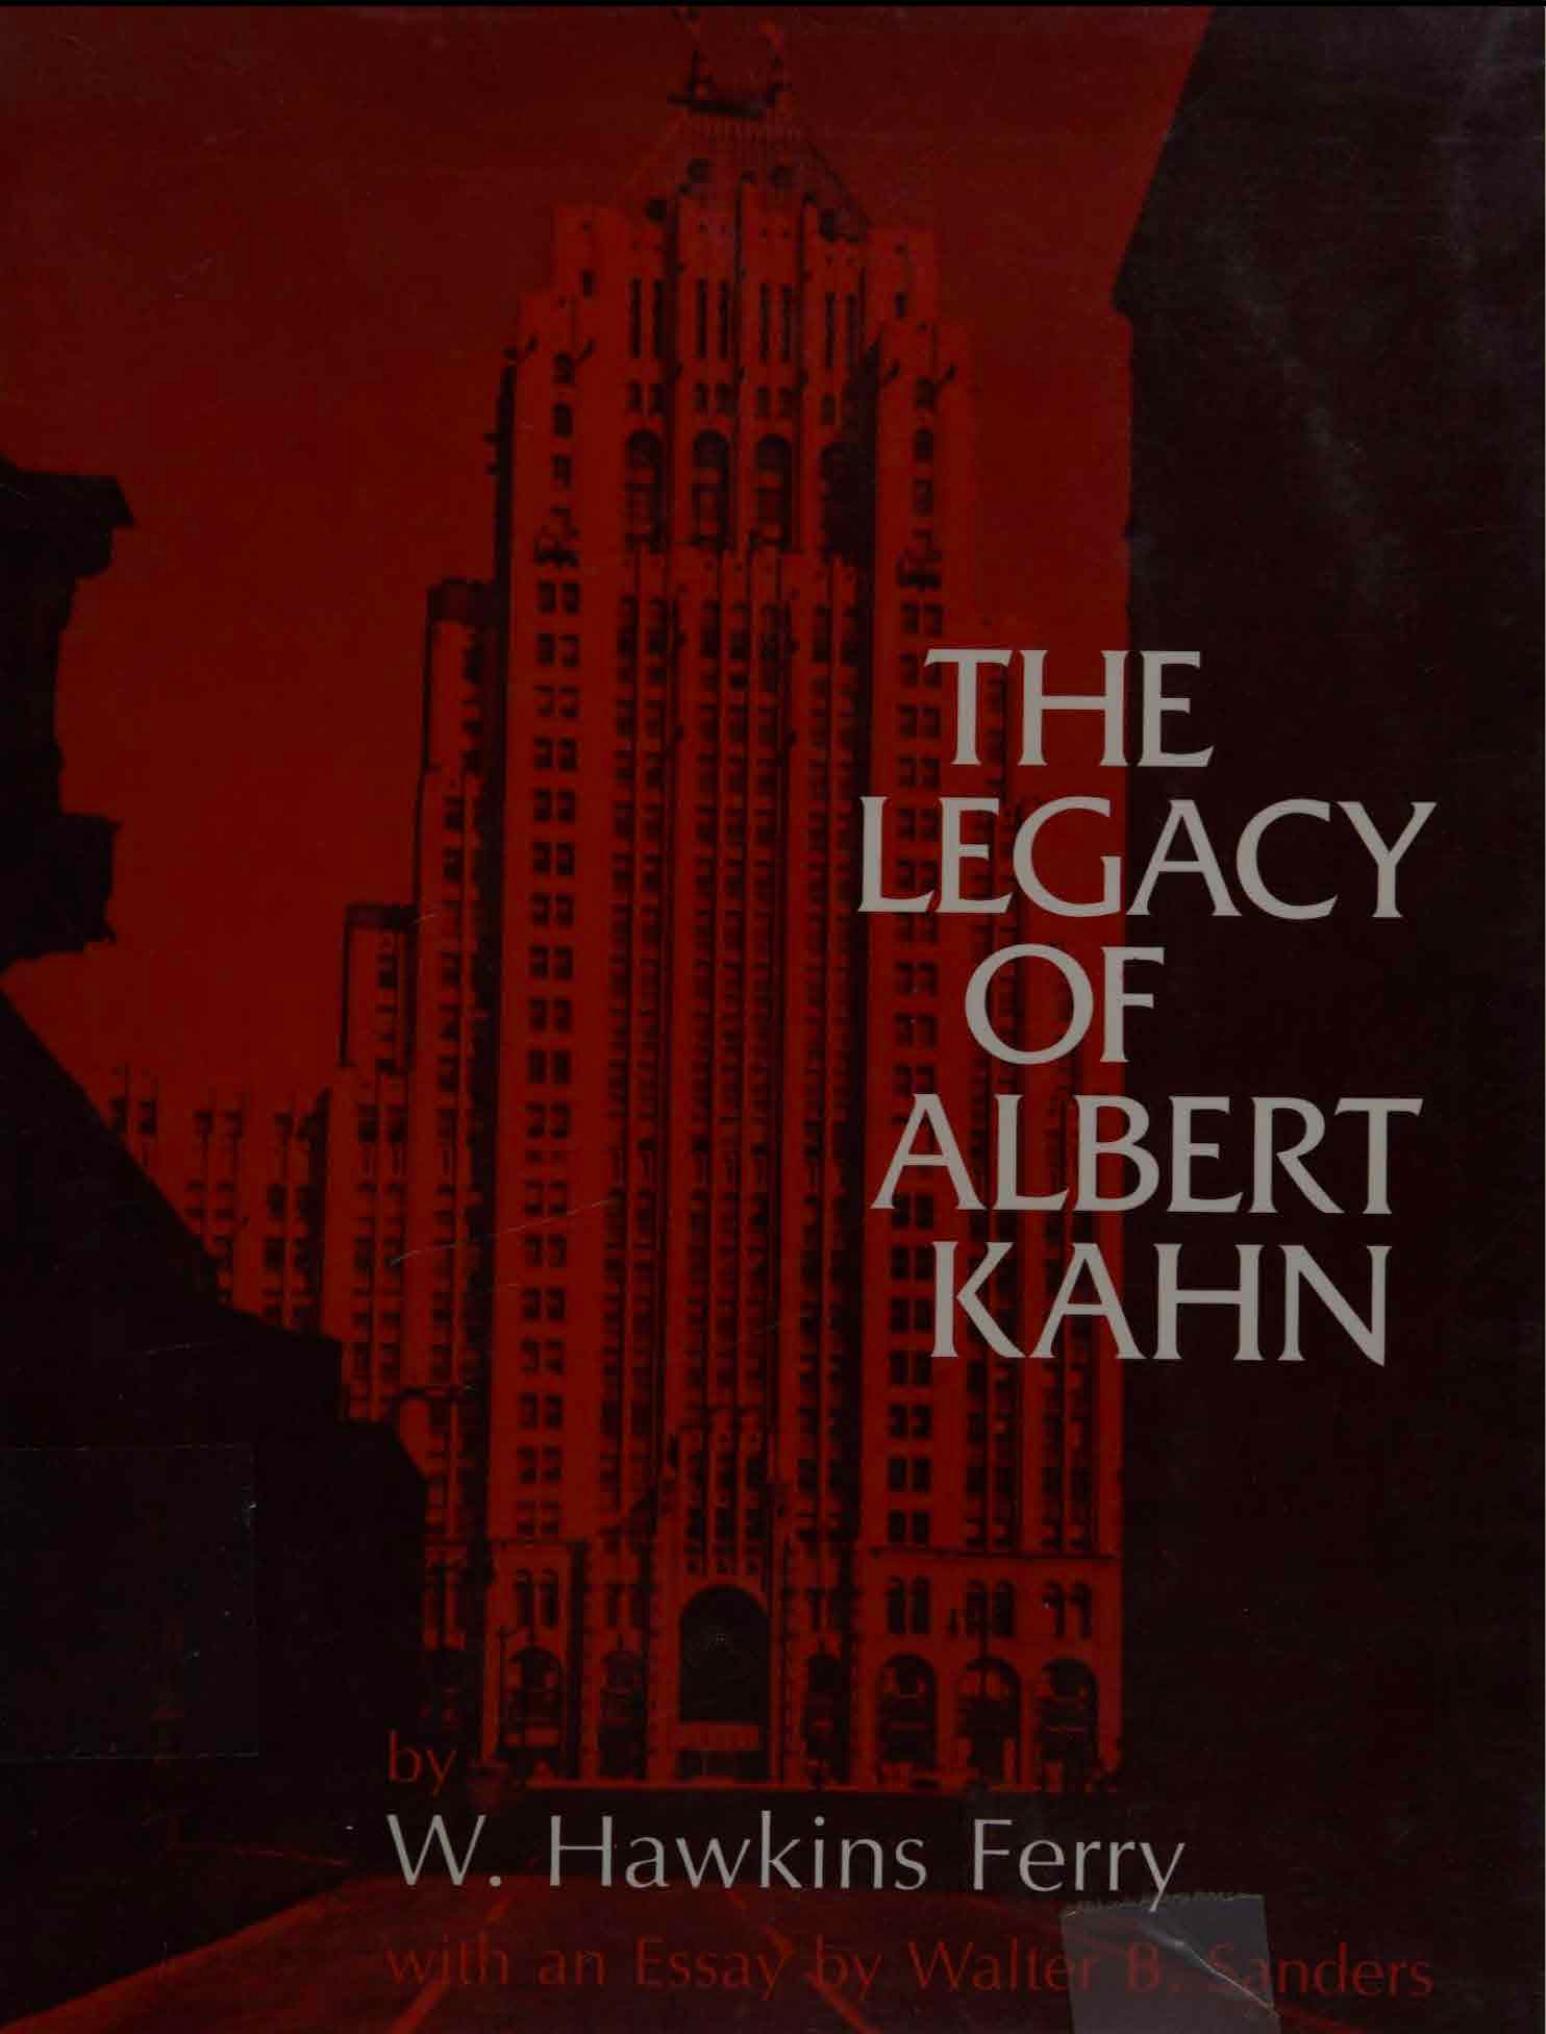 The Legacy of Albert Kahn (Great Lakes Books) by W.Hawkins Ferry